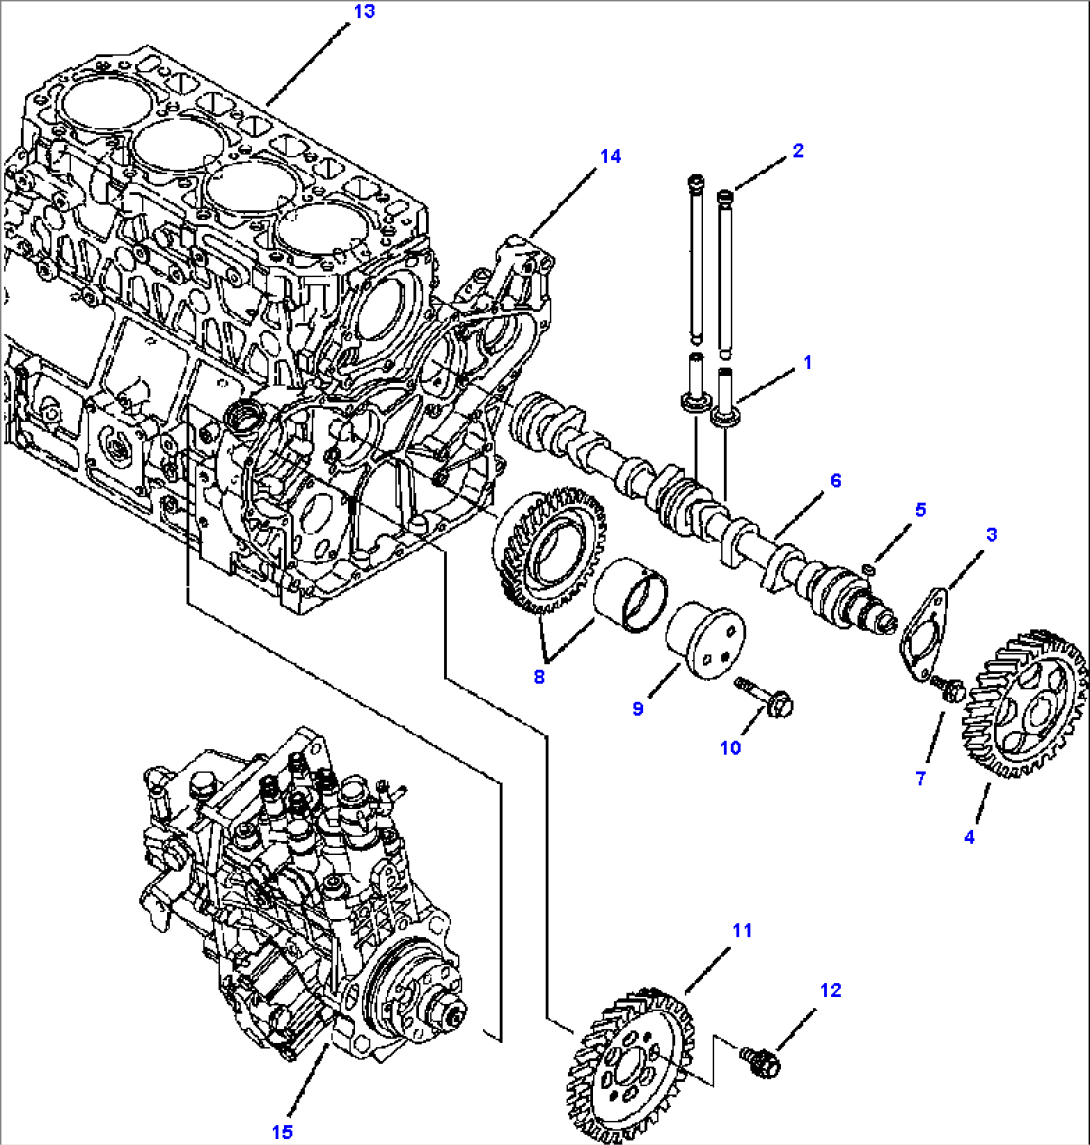 FIG. A0113-01A1 TIER II ENGINE - CAMSHAFT AND DRIVE GEAR